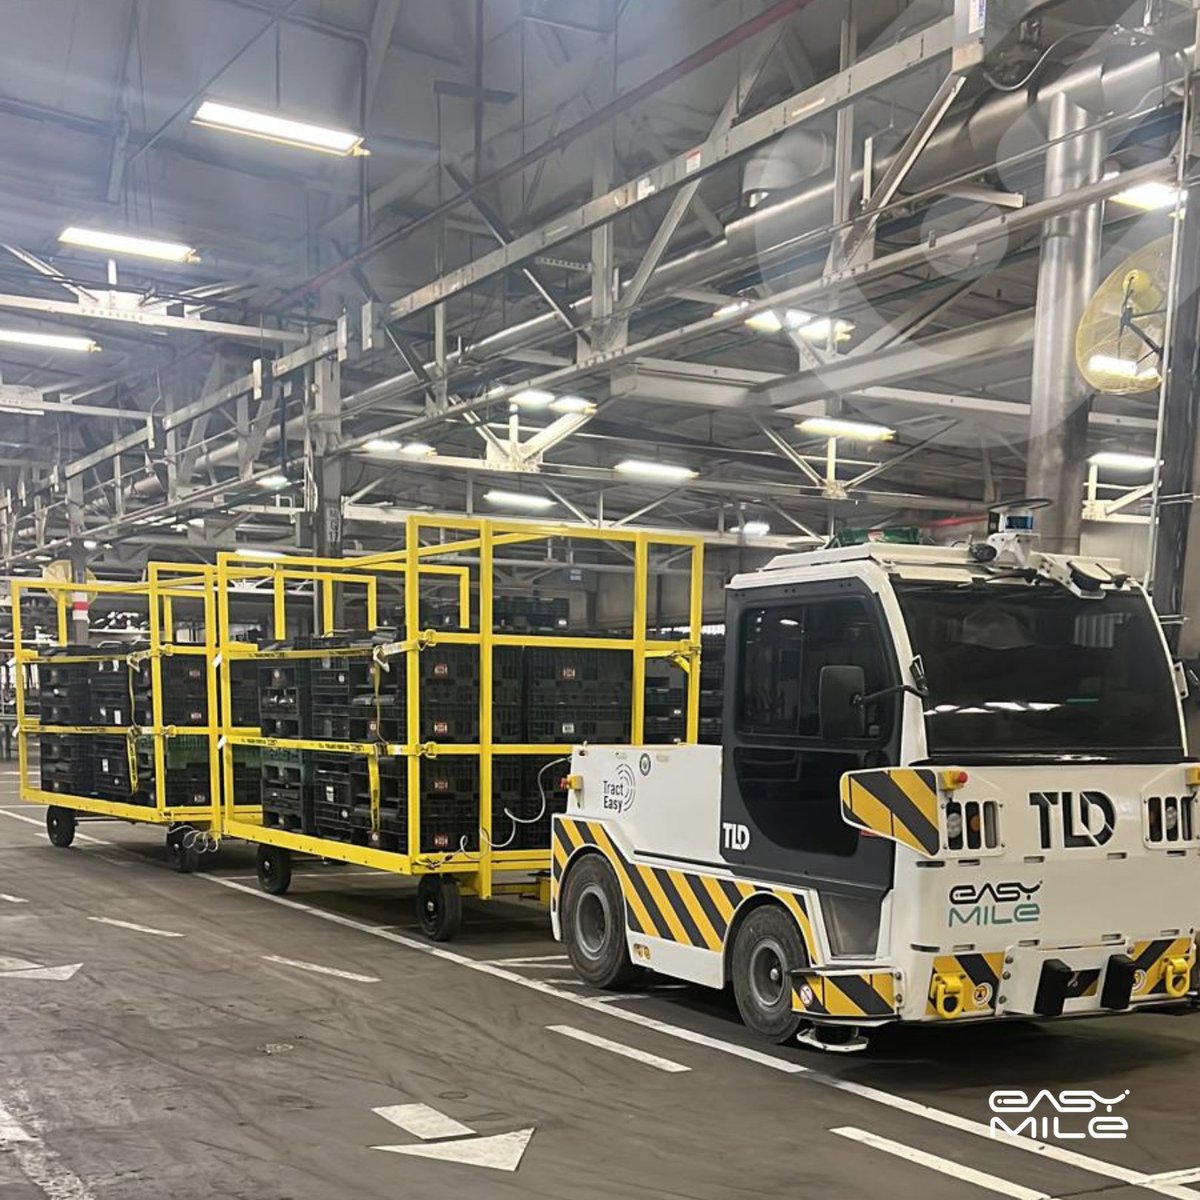 TractEasy to supply its autonomous 'EZTow' tractor to John Deere worldwide, following a successful proof of concept moving combine harvester cabs at their Illinois facility. Read more: bit.ly/4ccOV80